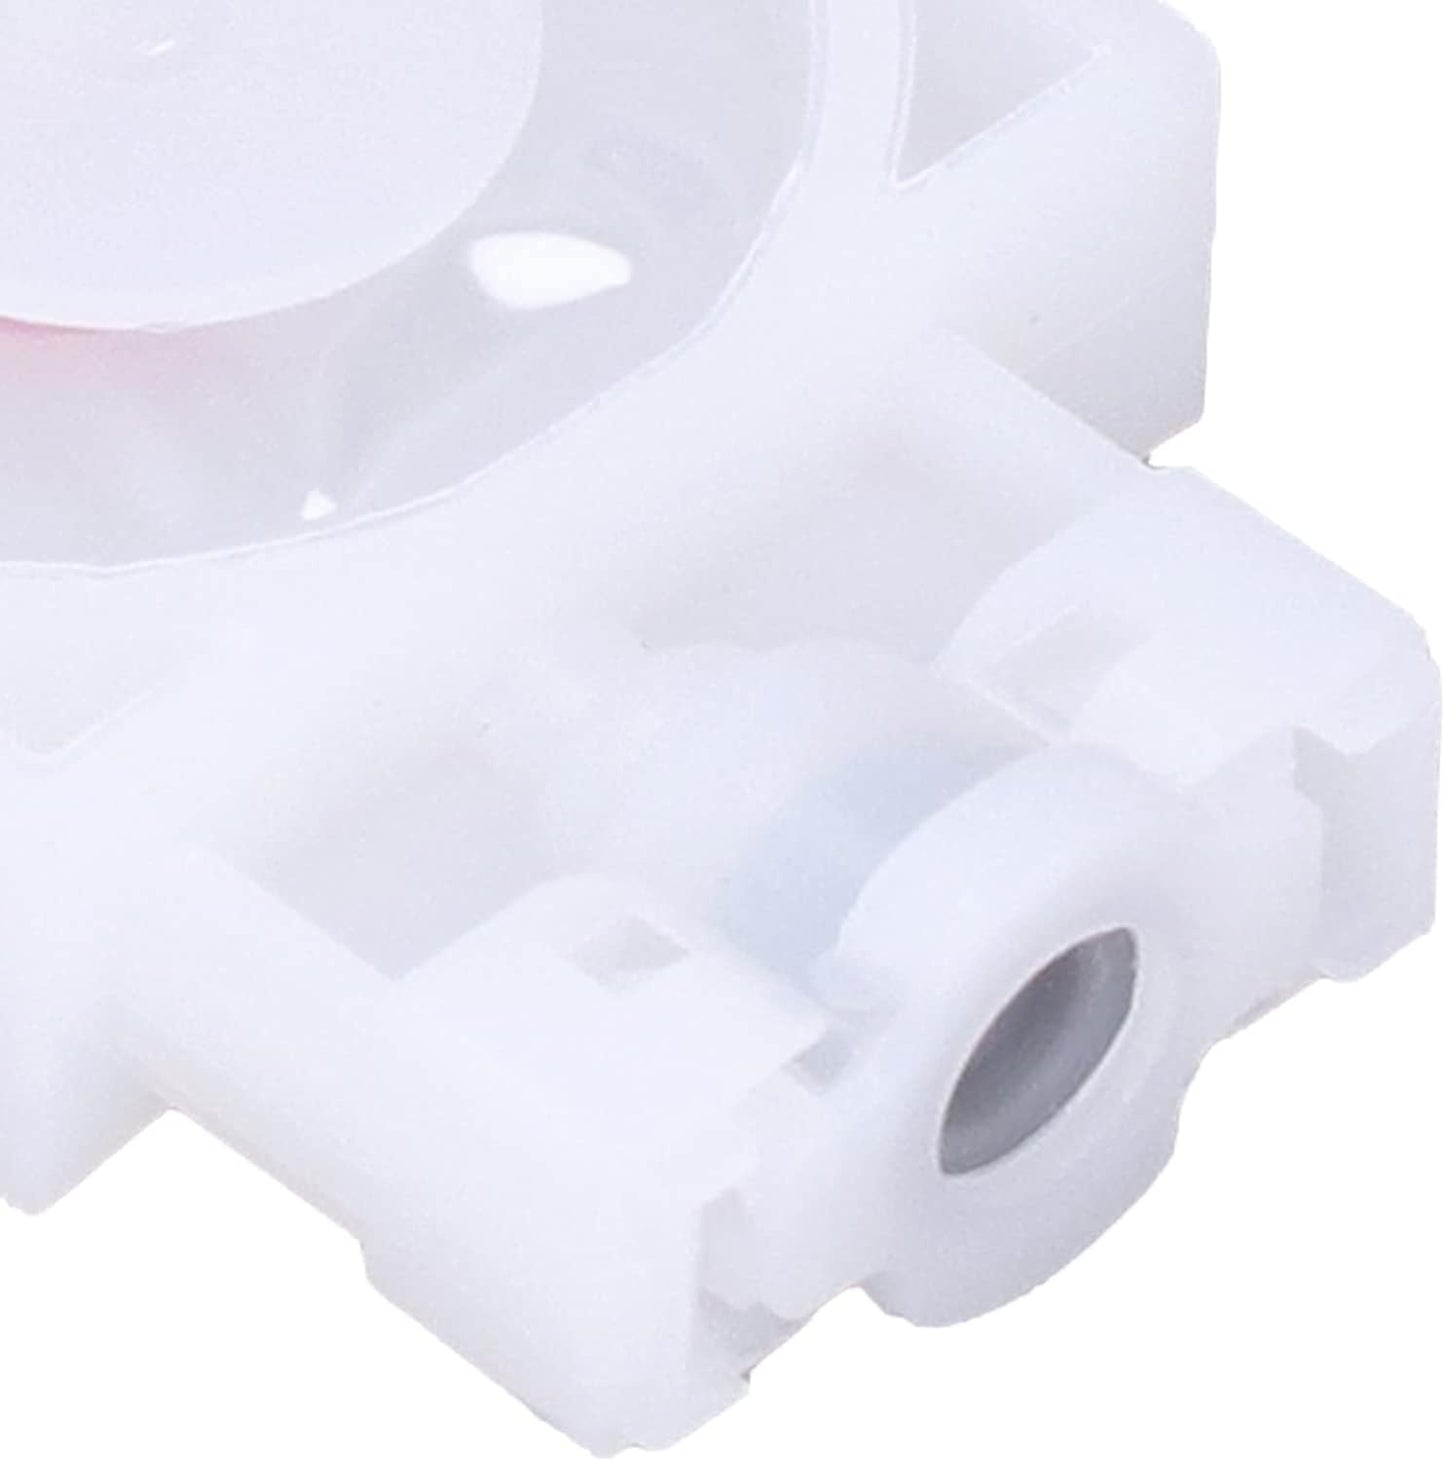 XP600 / i3200 DTF Ink Damper Replacement |  4mm x 3mm Ink Tube(White)